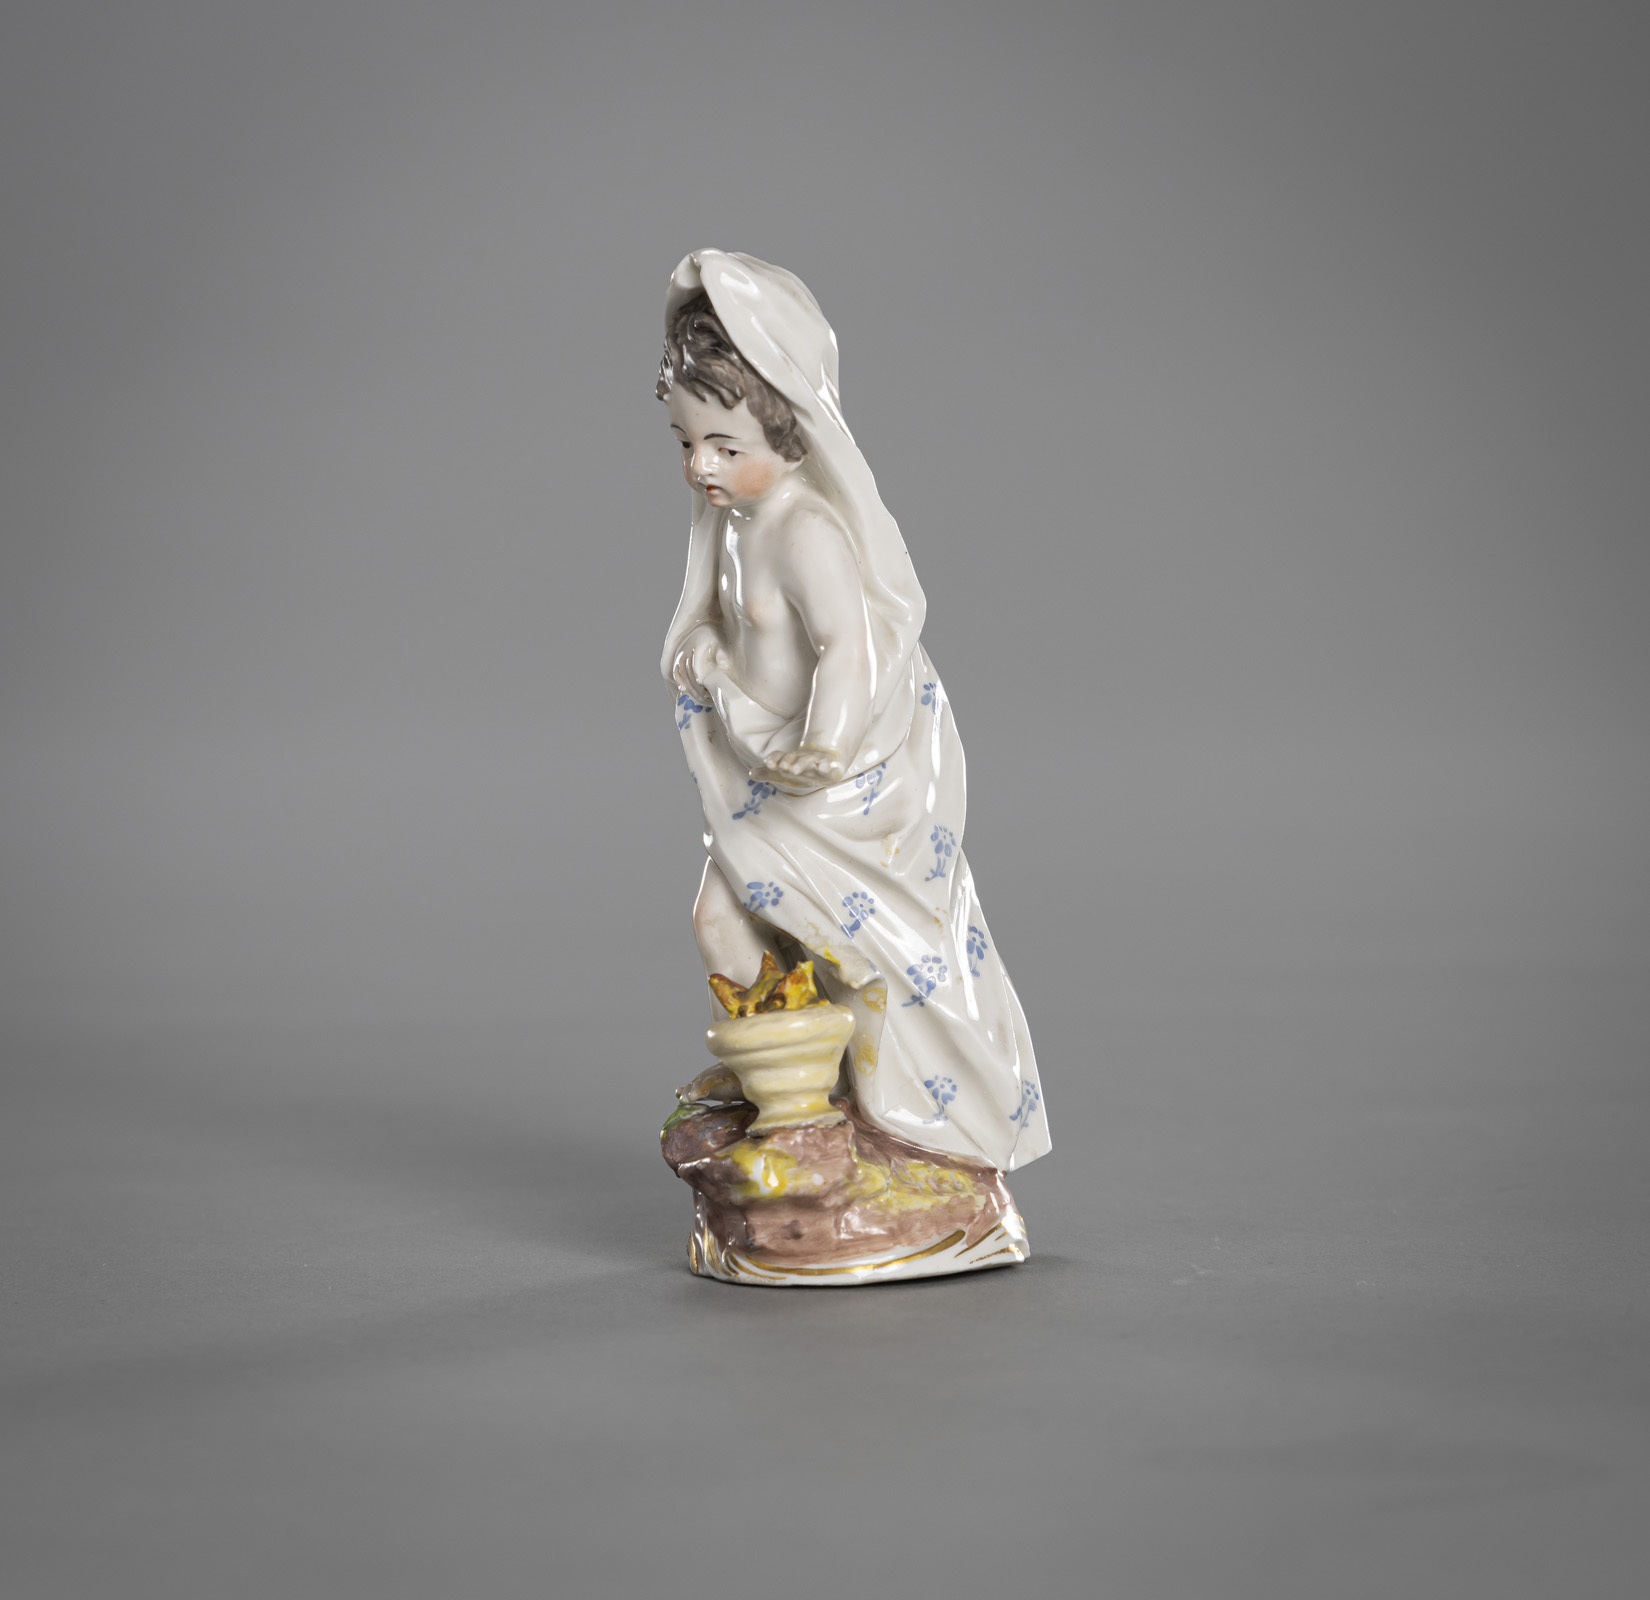 A FIGURINE OF A PUTTO DEPICTING THE WINTER - Image 2 of 4